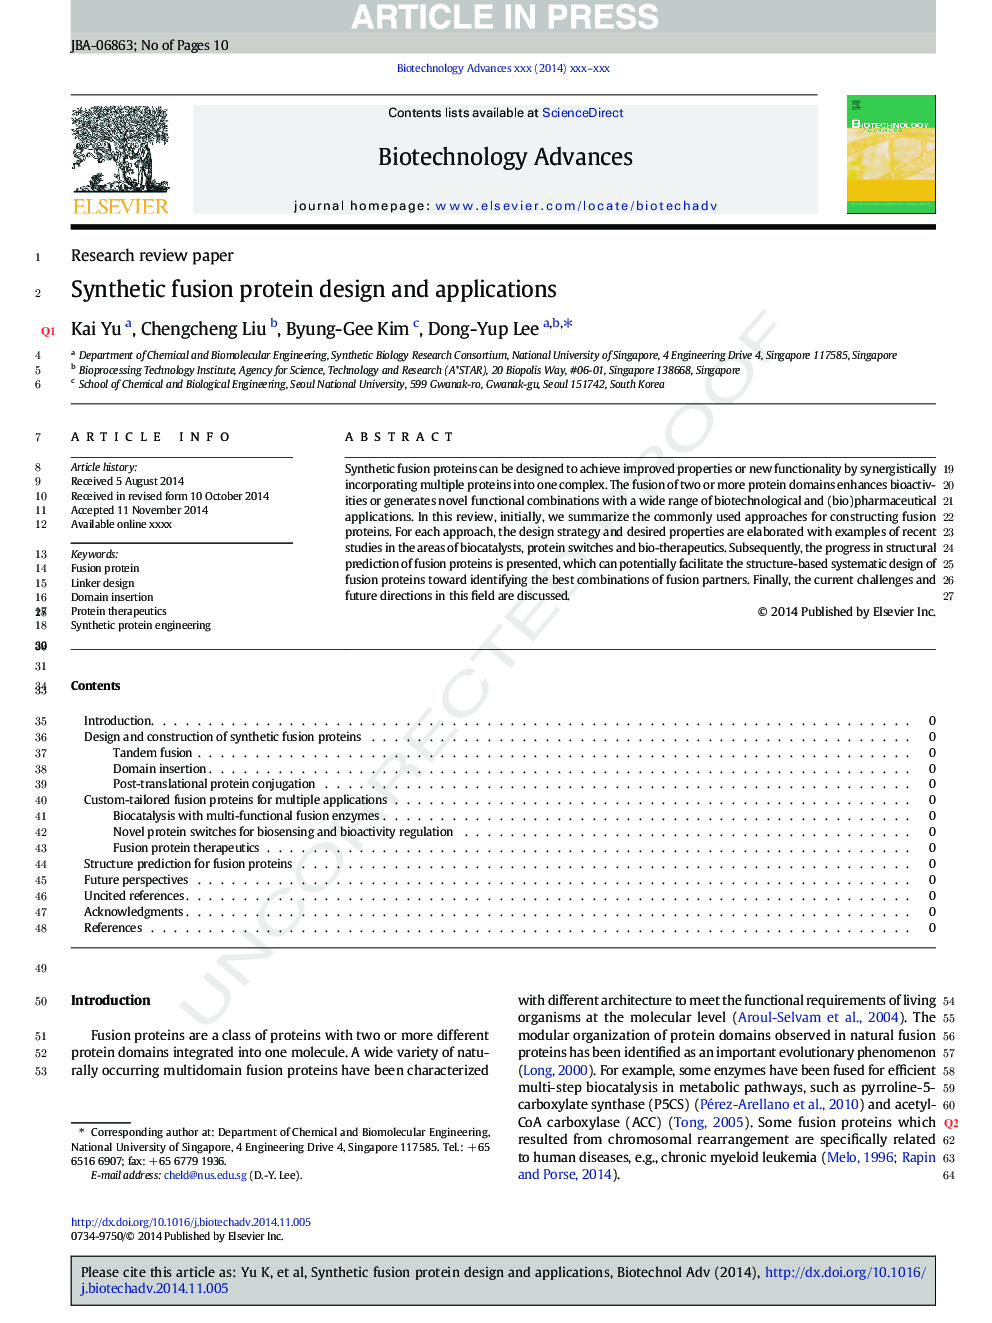 Synthetic fusion protein design and applications